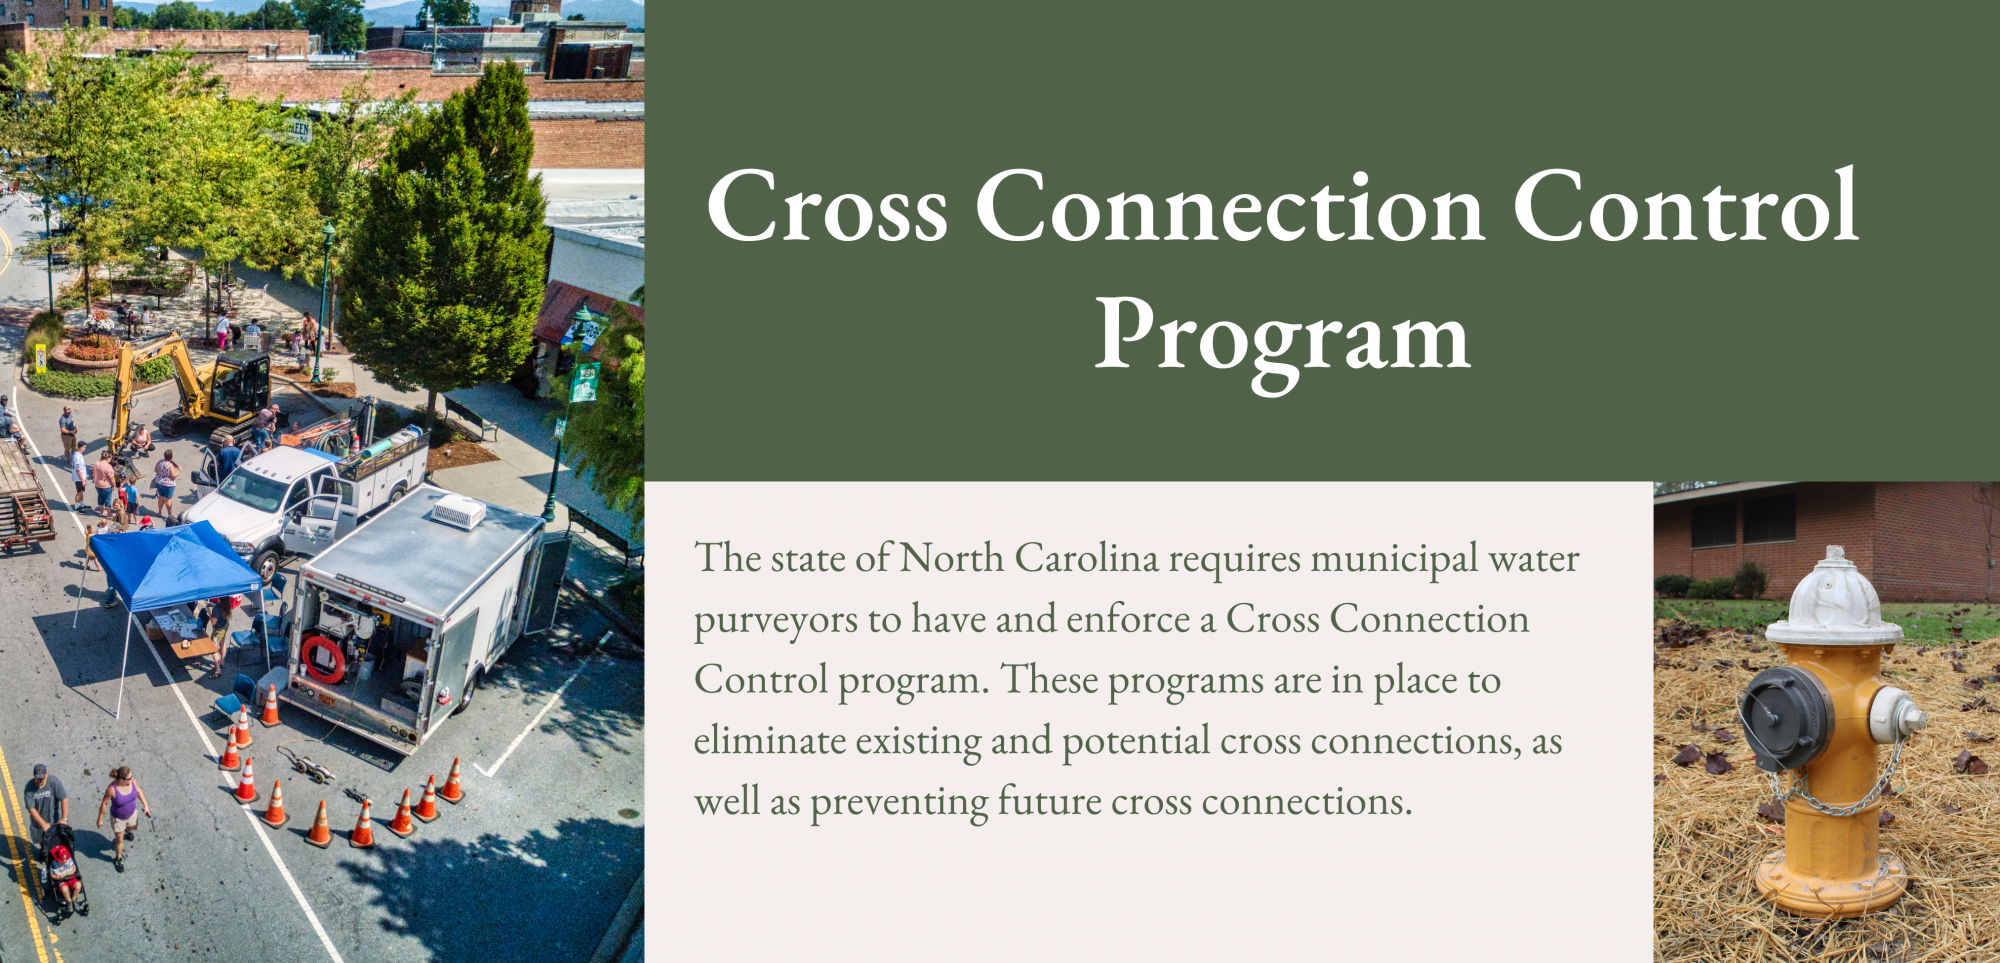 flyer giving information about the "Cross connection Control Program"